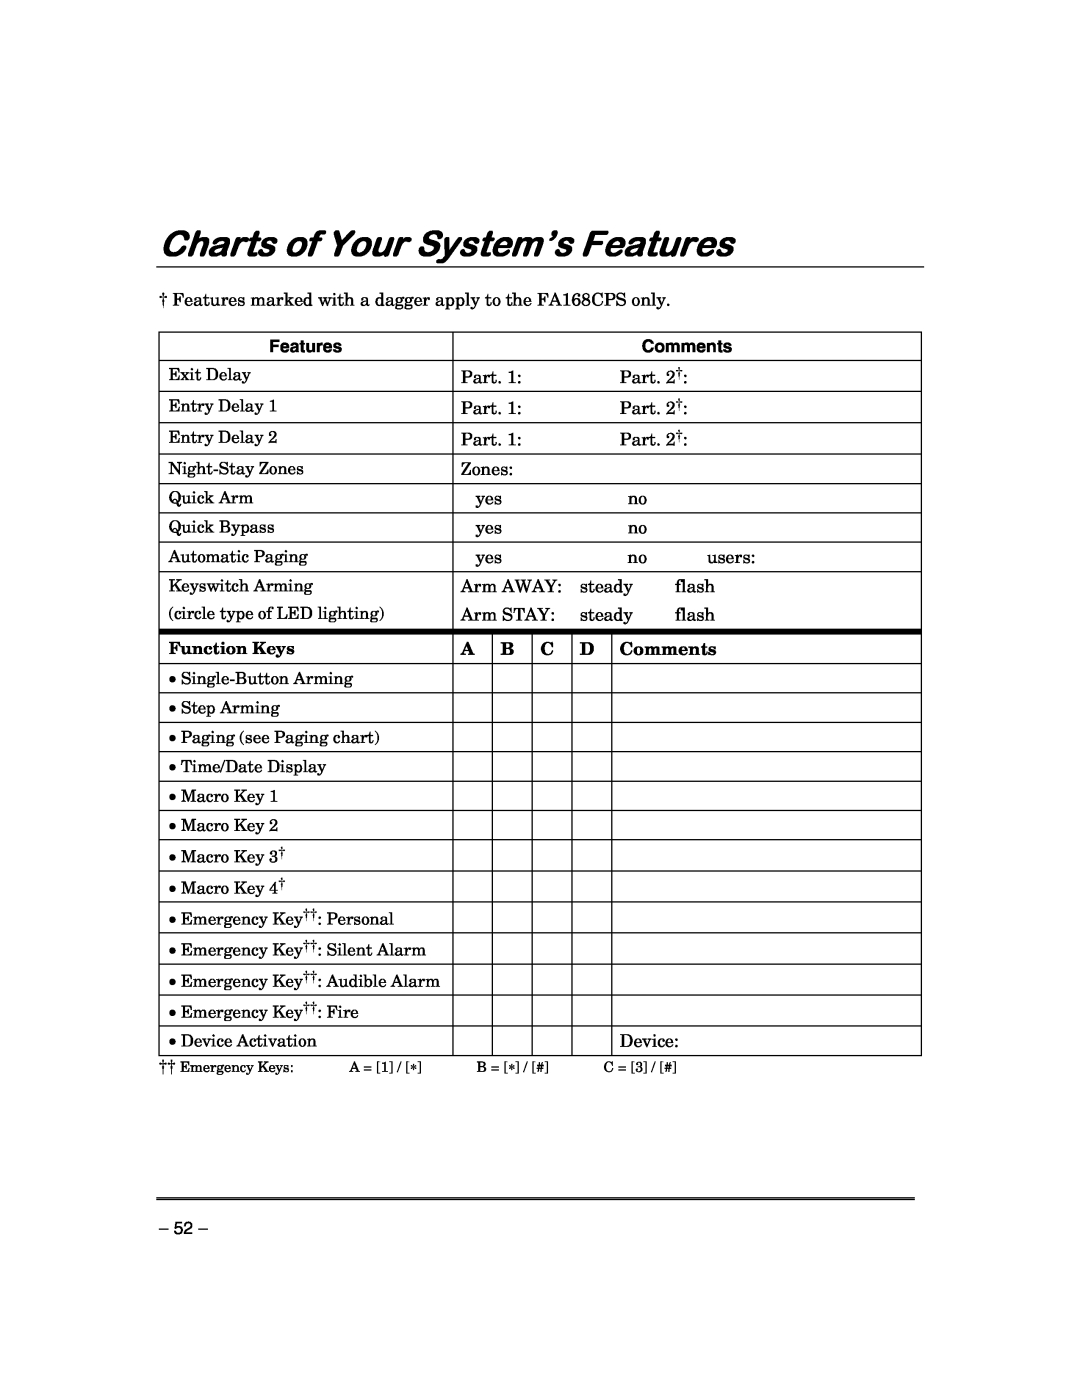 First Alert FA148CPSIA, FA168CPSSIA manual Charts of Your System’s Features, Comments 